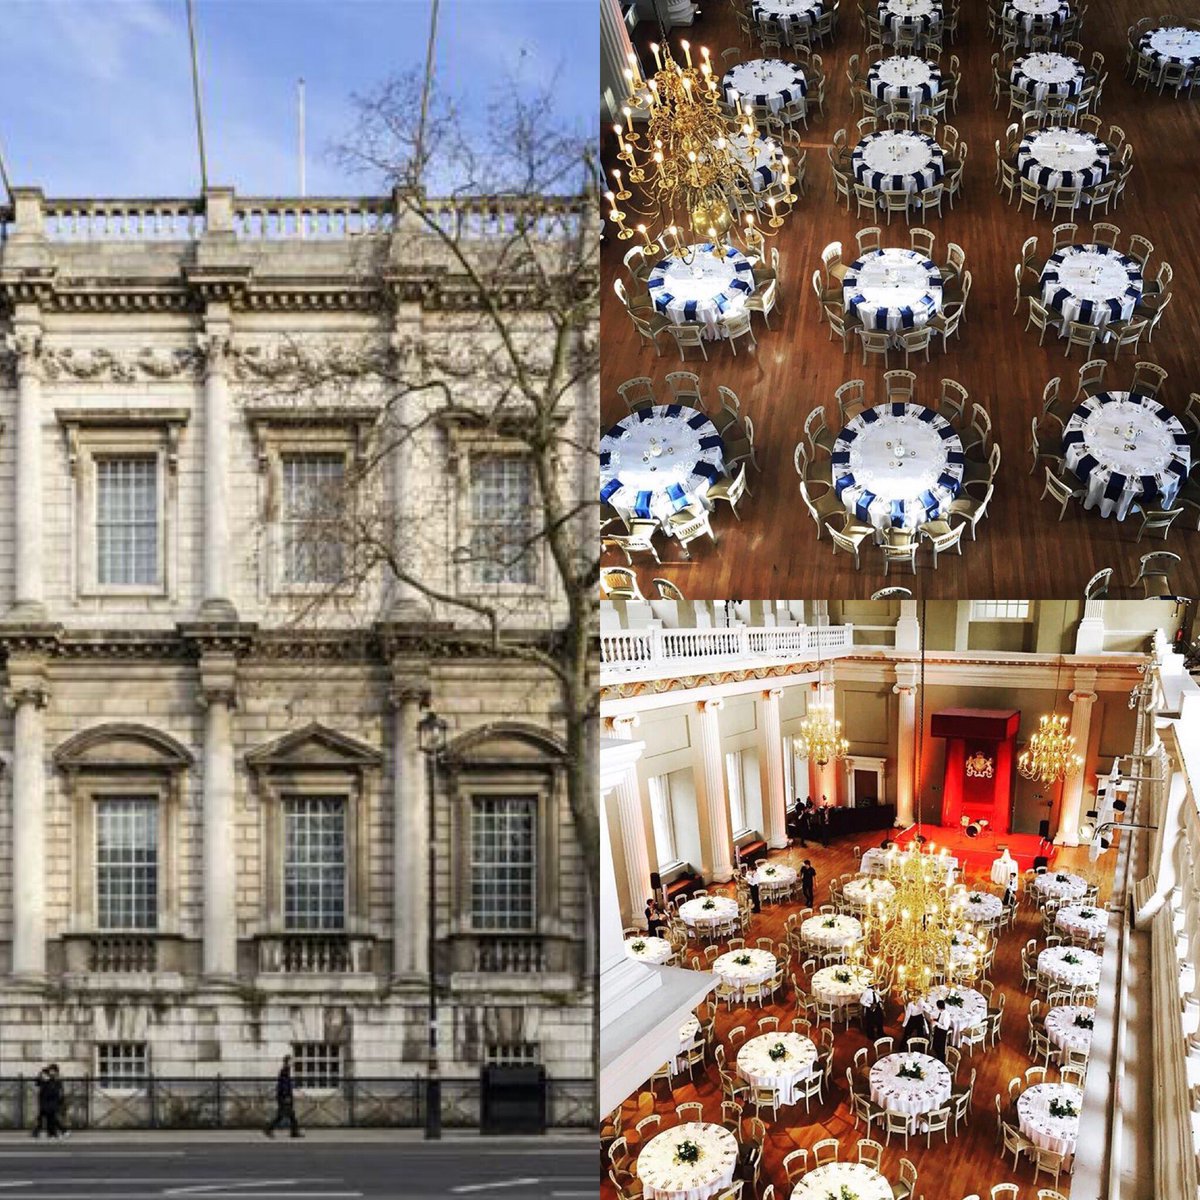 V E N U E  O F  T H E  M O N T H    for October is #banquetinghouse @HRP_Events #palaceofwhitehall perfect for #dinners #receptions #weddings #confererences #meetings versatile at anytime of the year @chandco